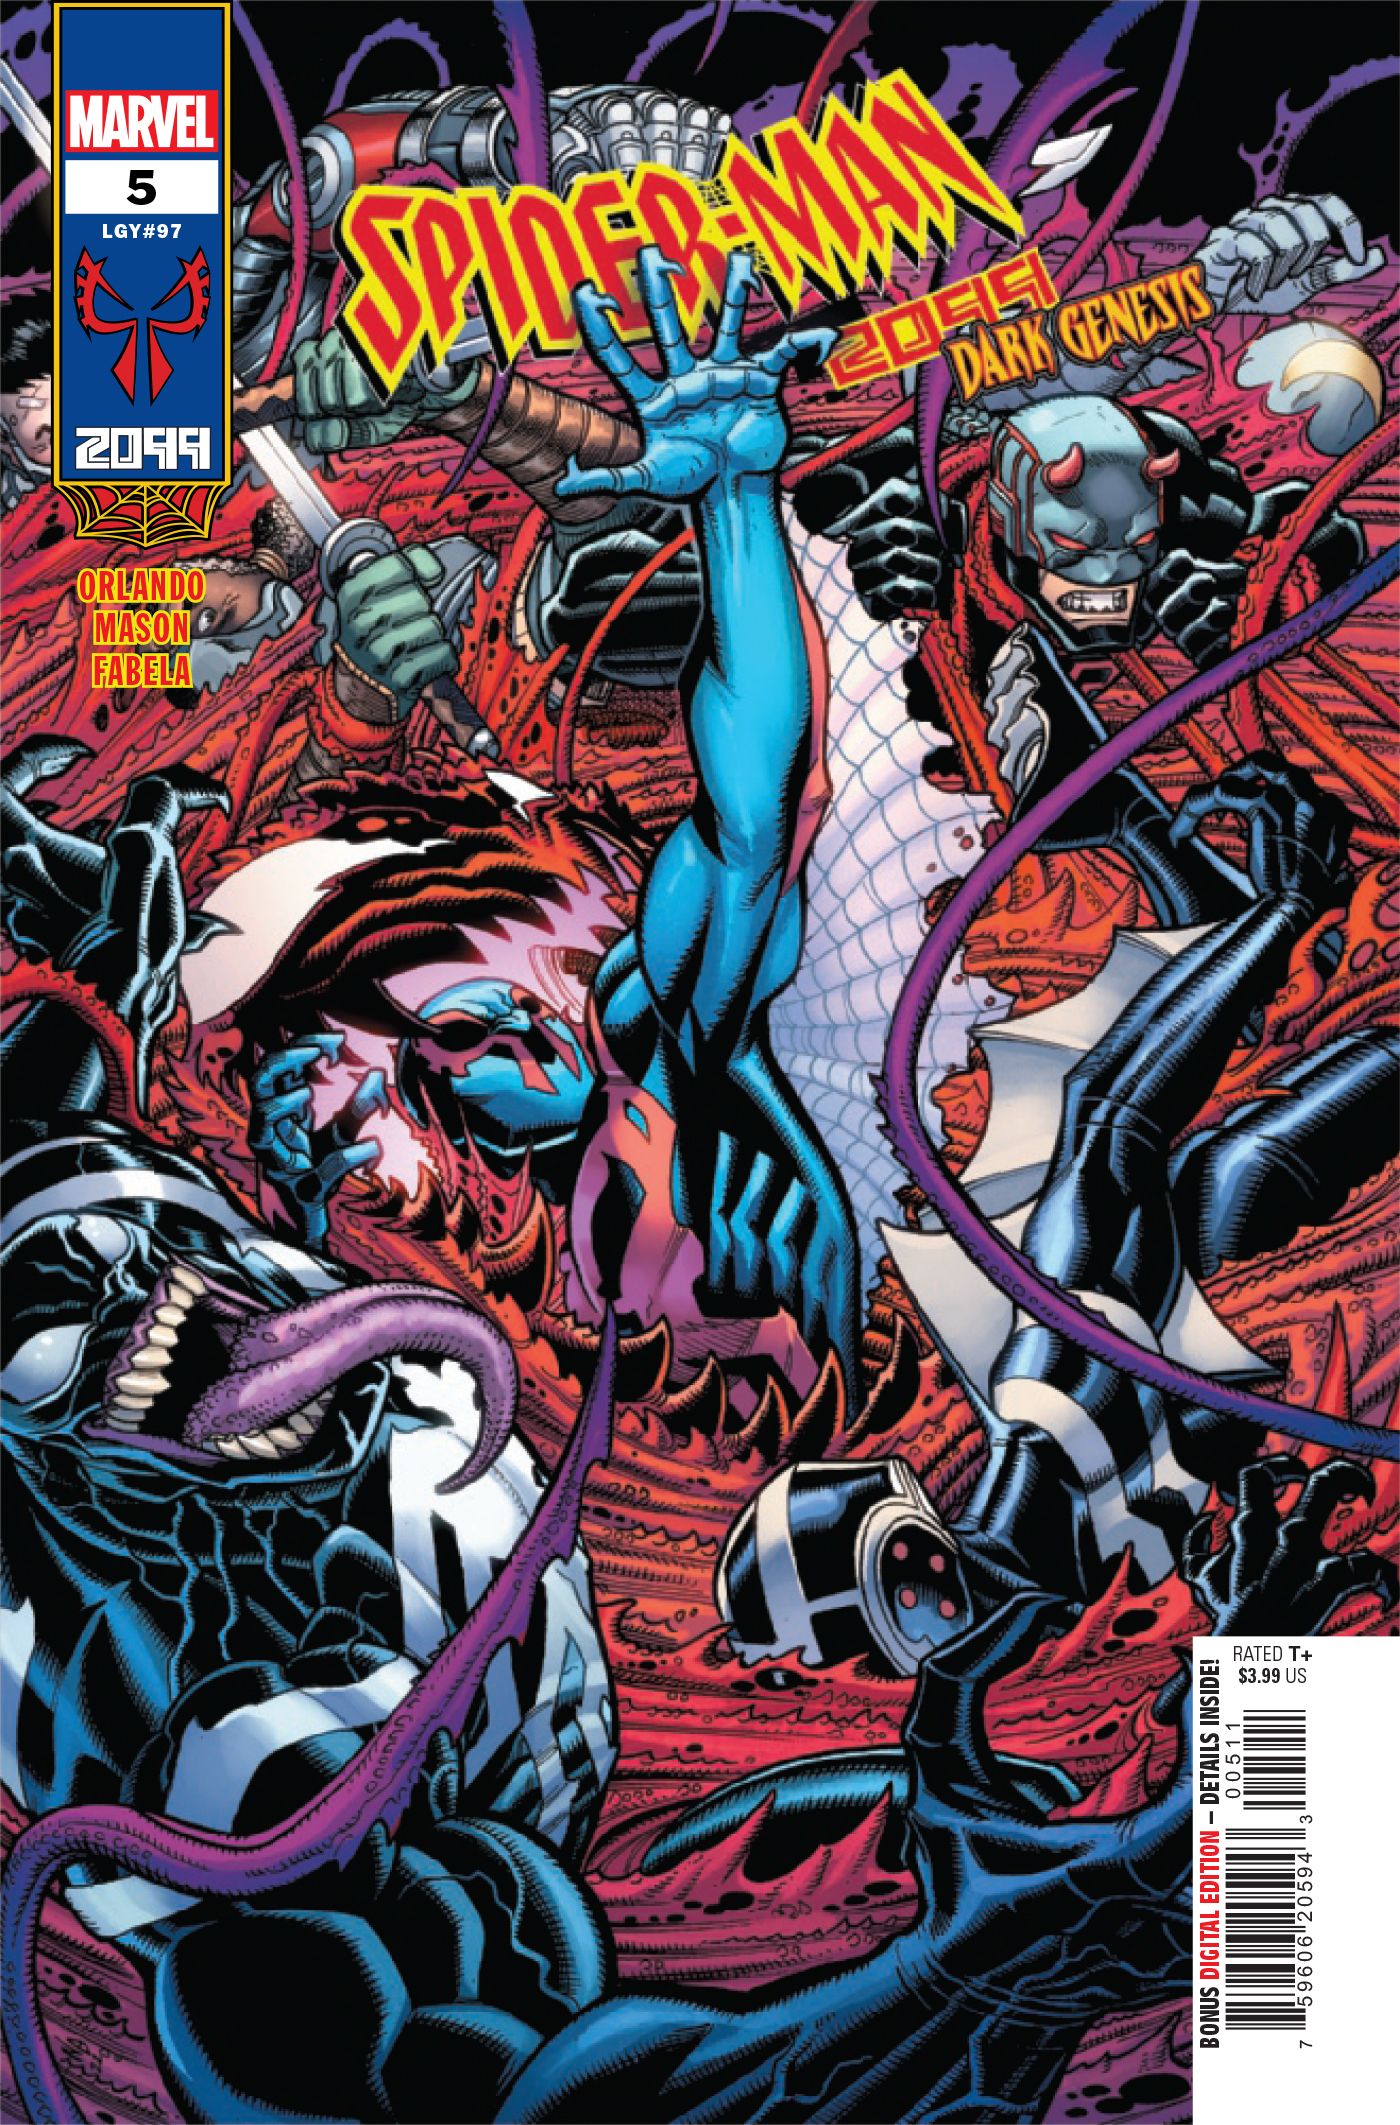 An early look at Spider-Man 2099: Dark Genesis #5 (2023) from Marvel Comics.